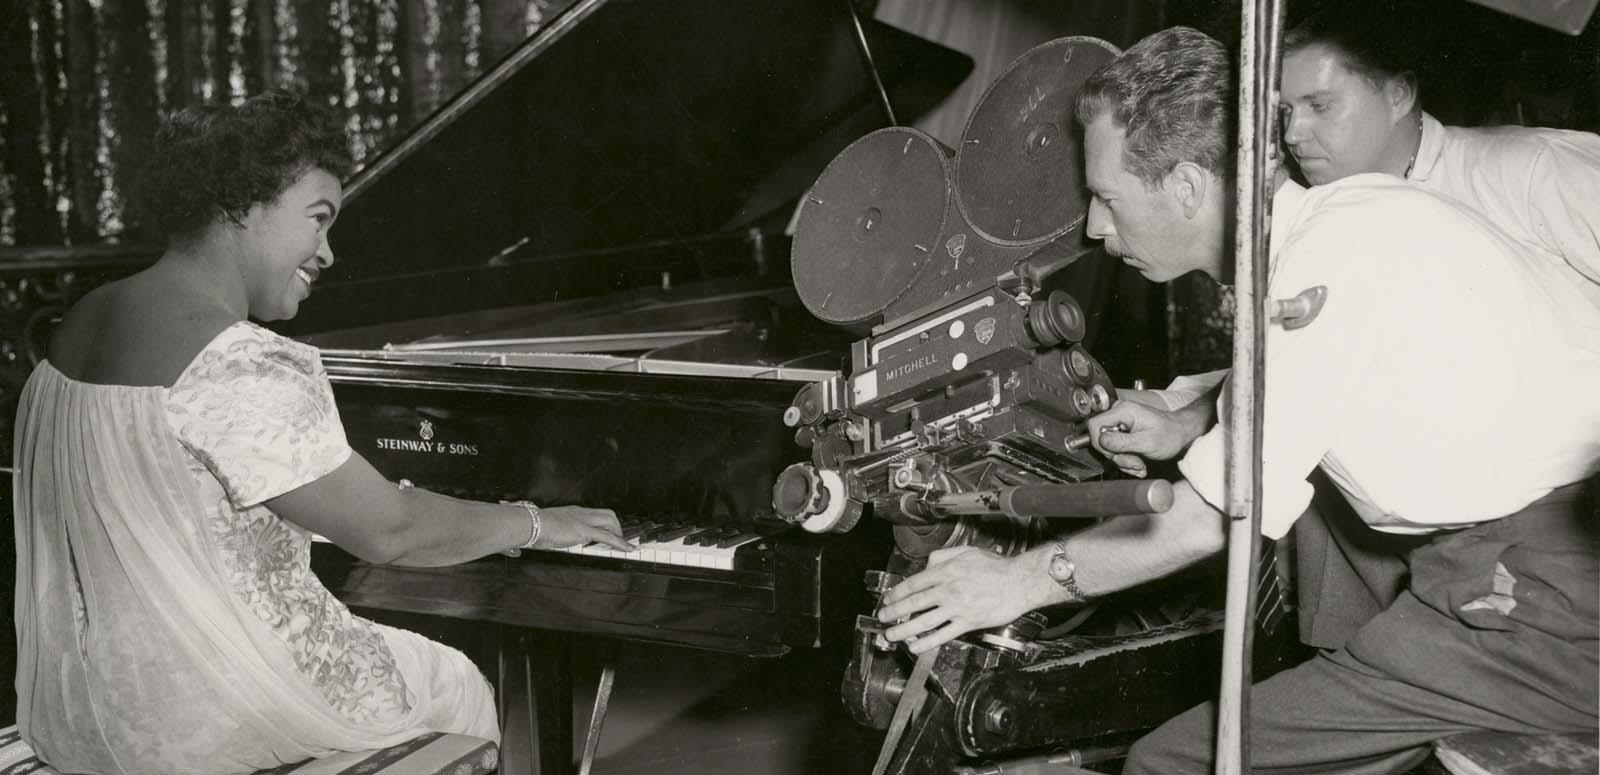 Winifred Atwell playing the piano and smiling while two men film her with a 35mm film camera next to the piano